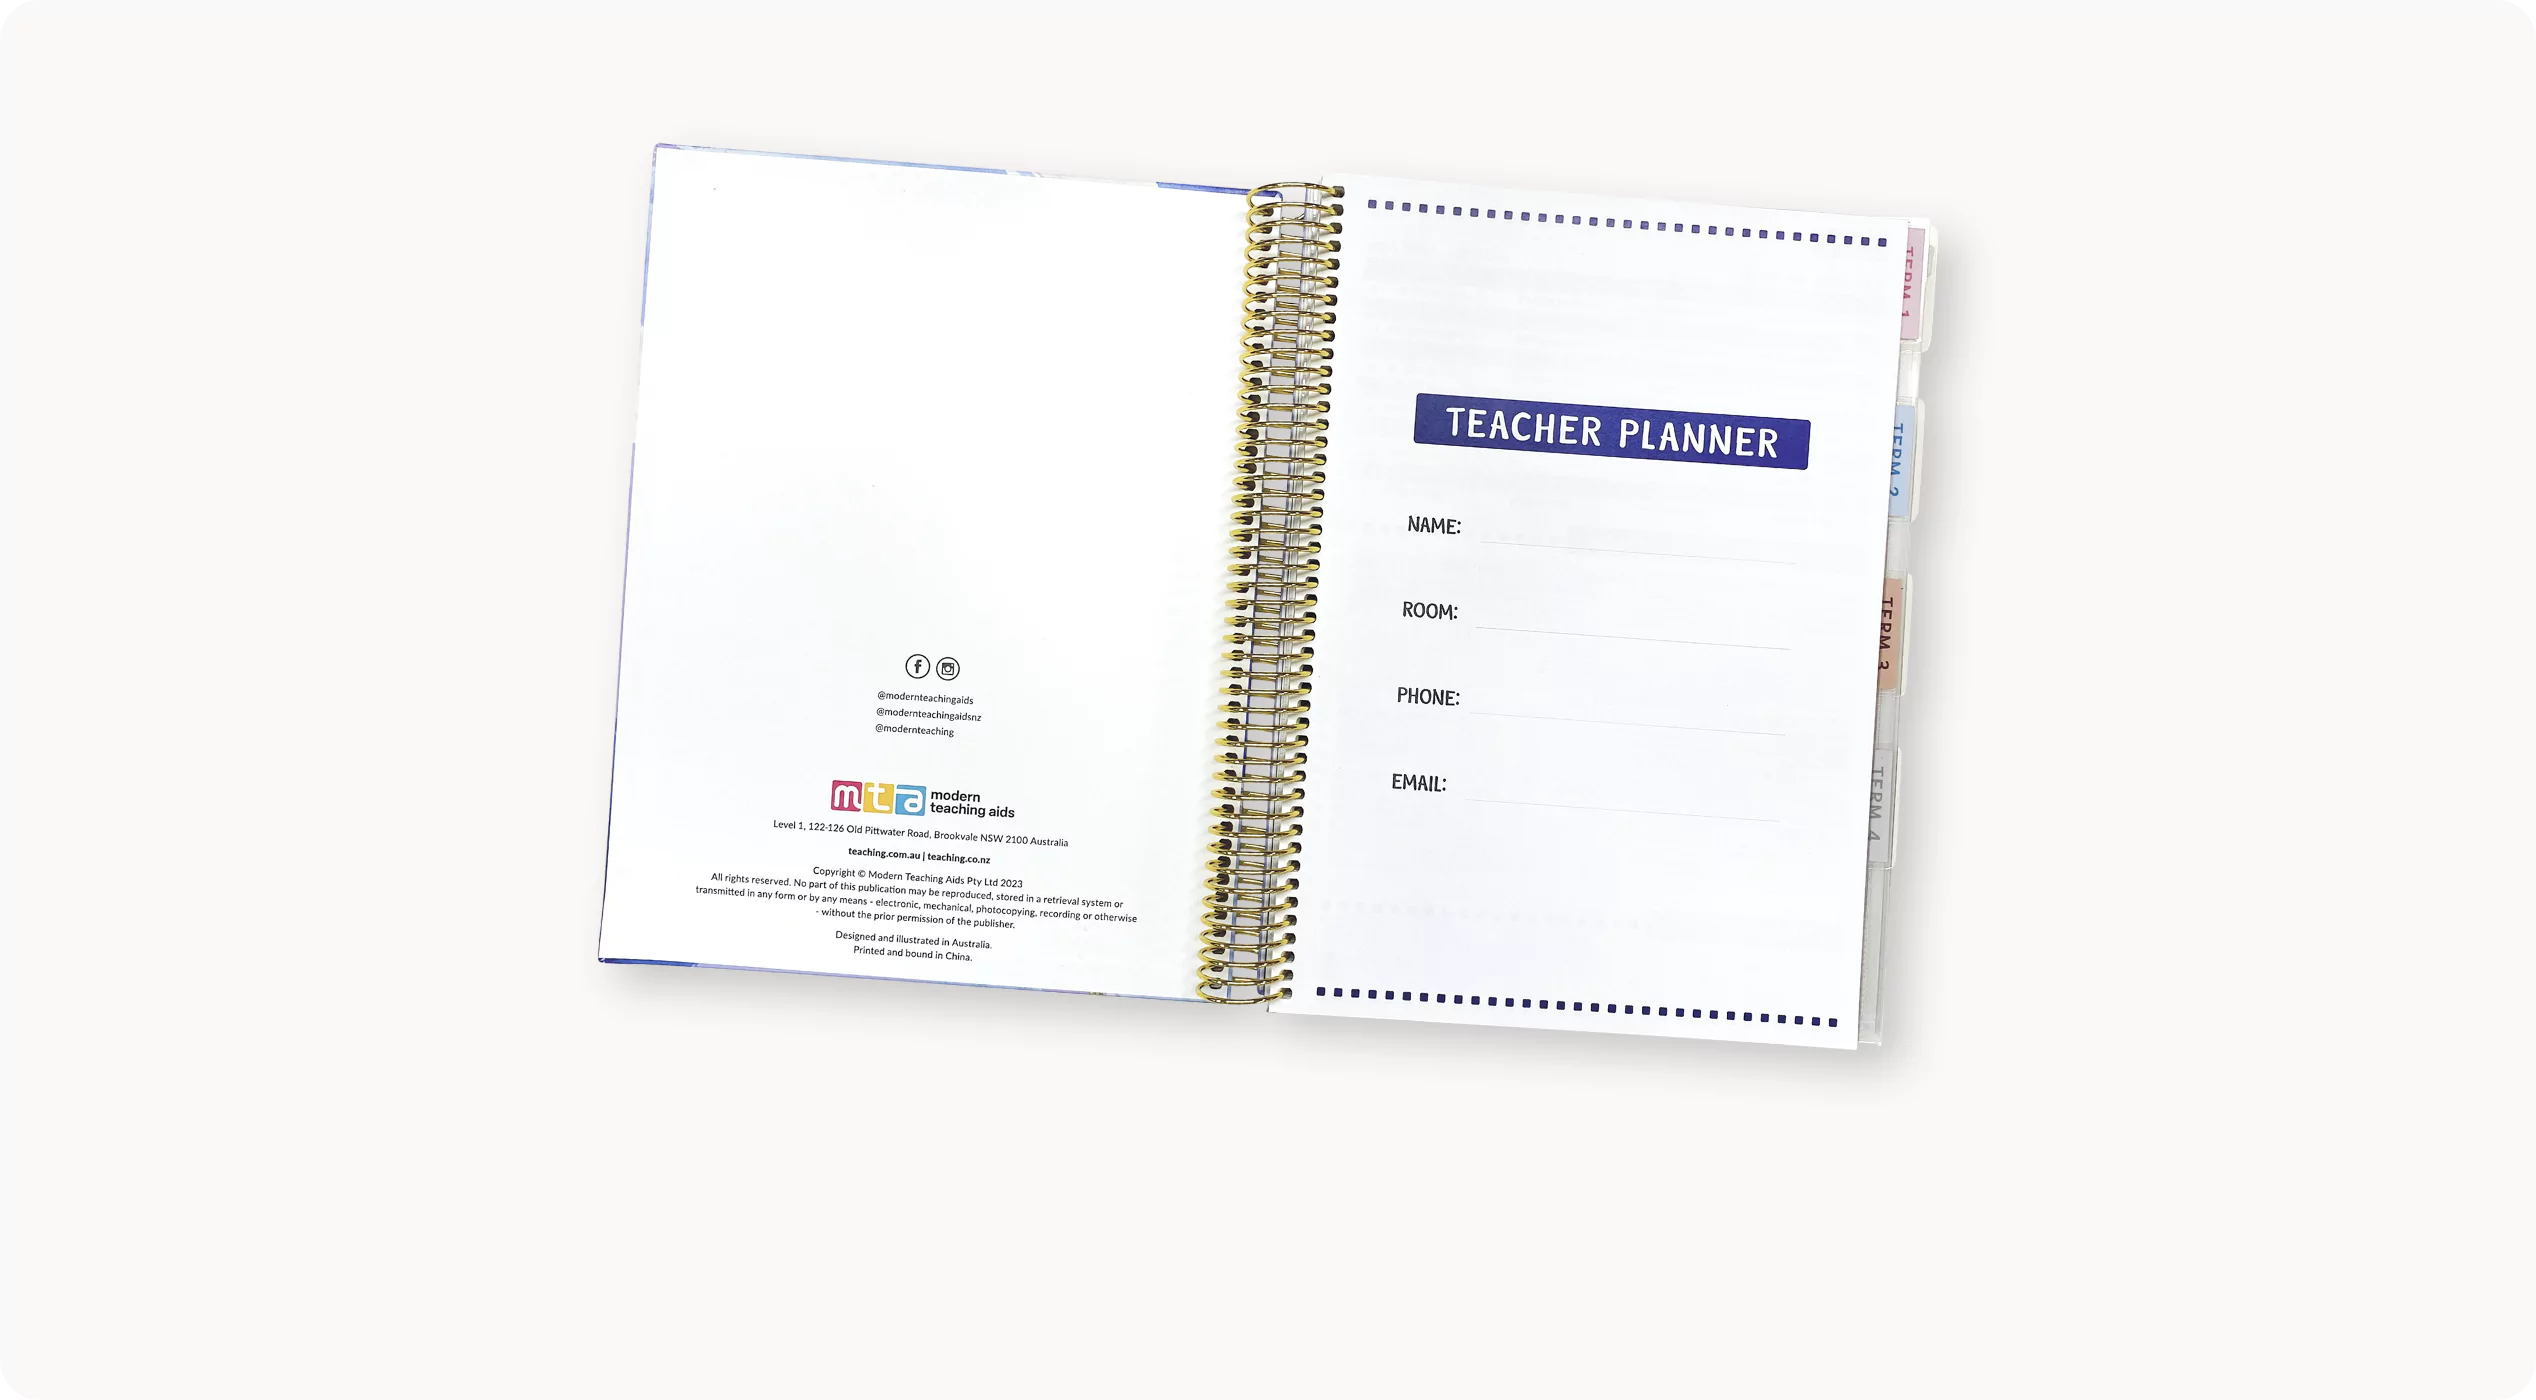 02/10 - Start personalising your planner from page one!